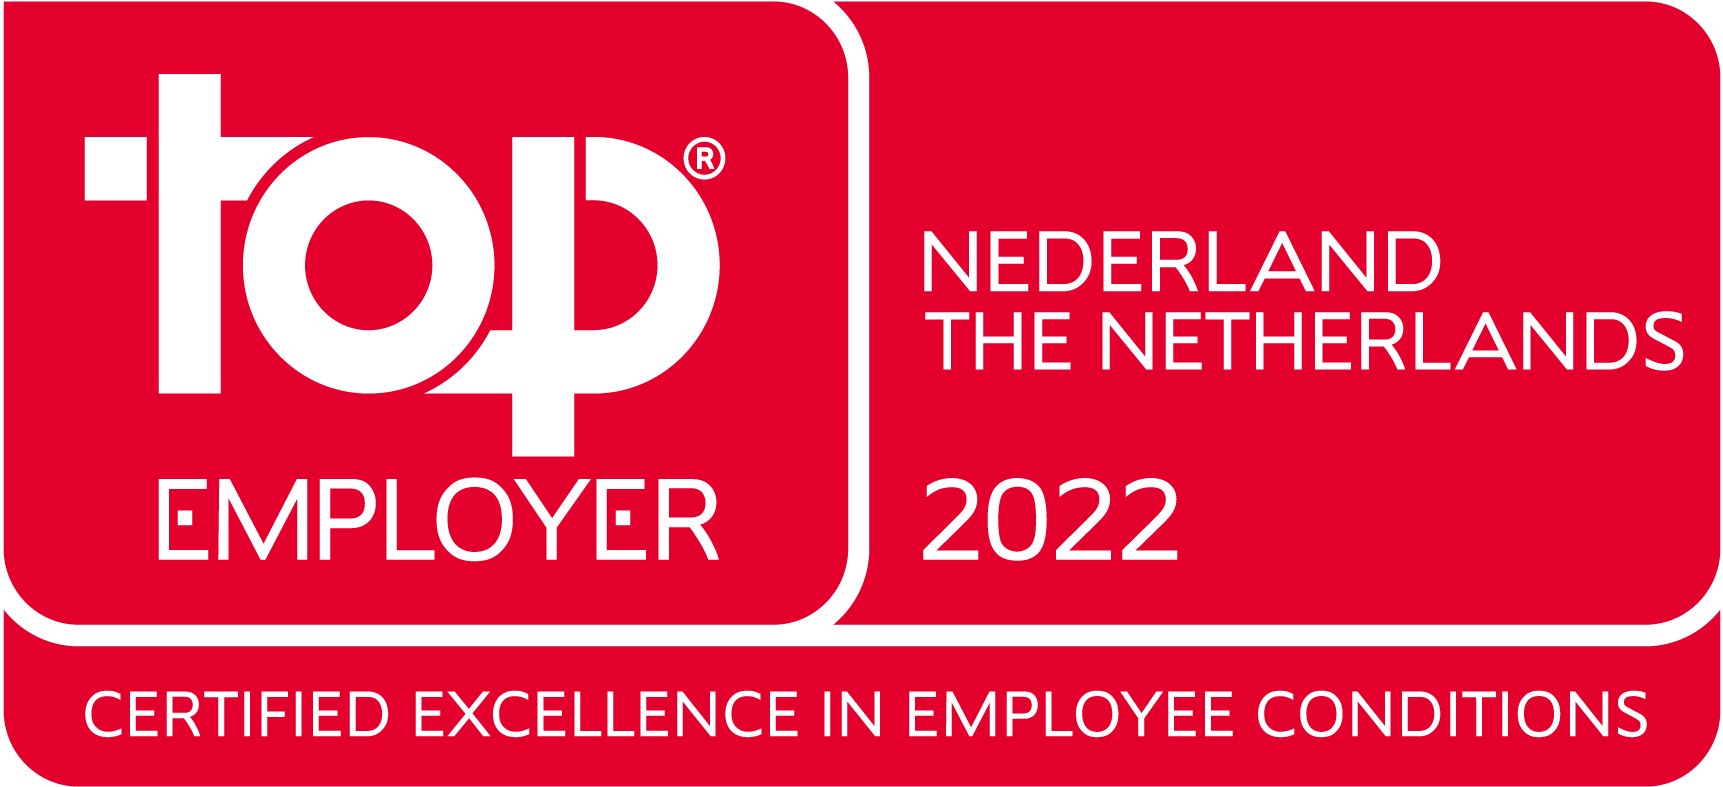 Top employer in Germany & the Netherlands